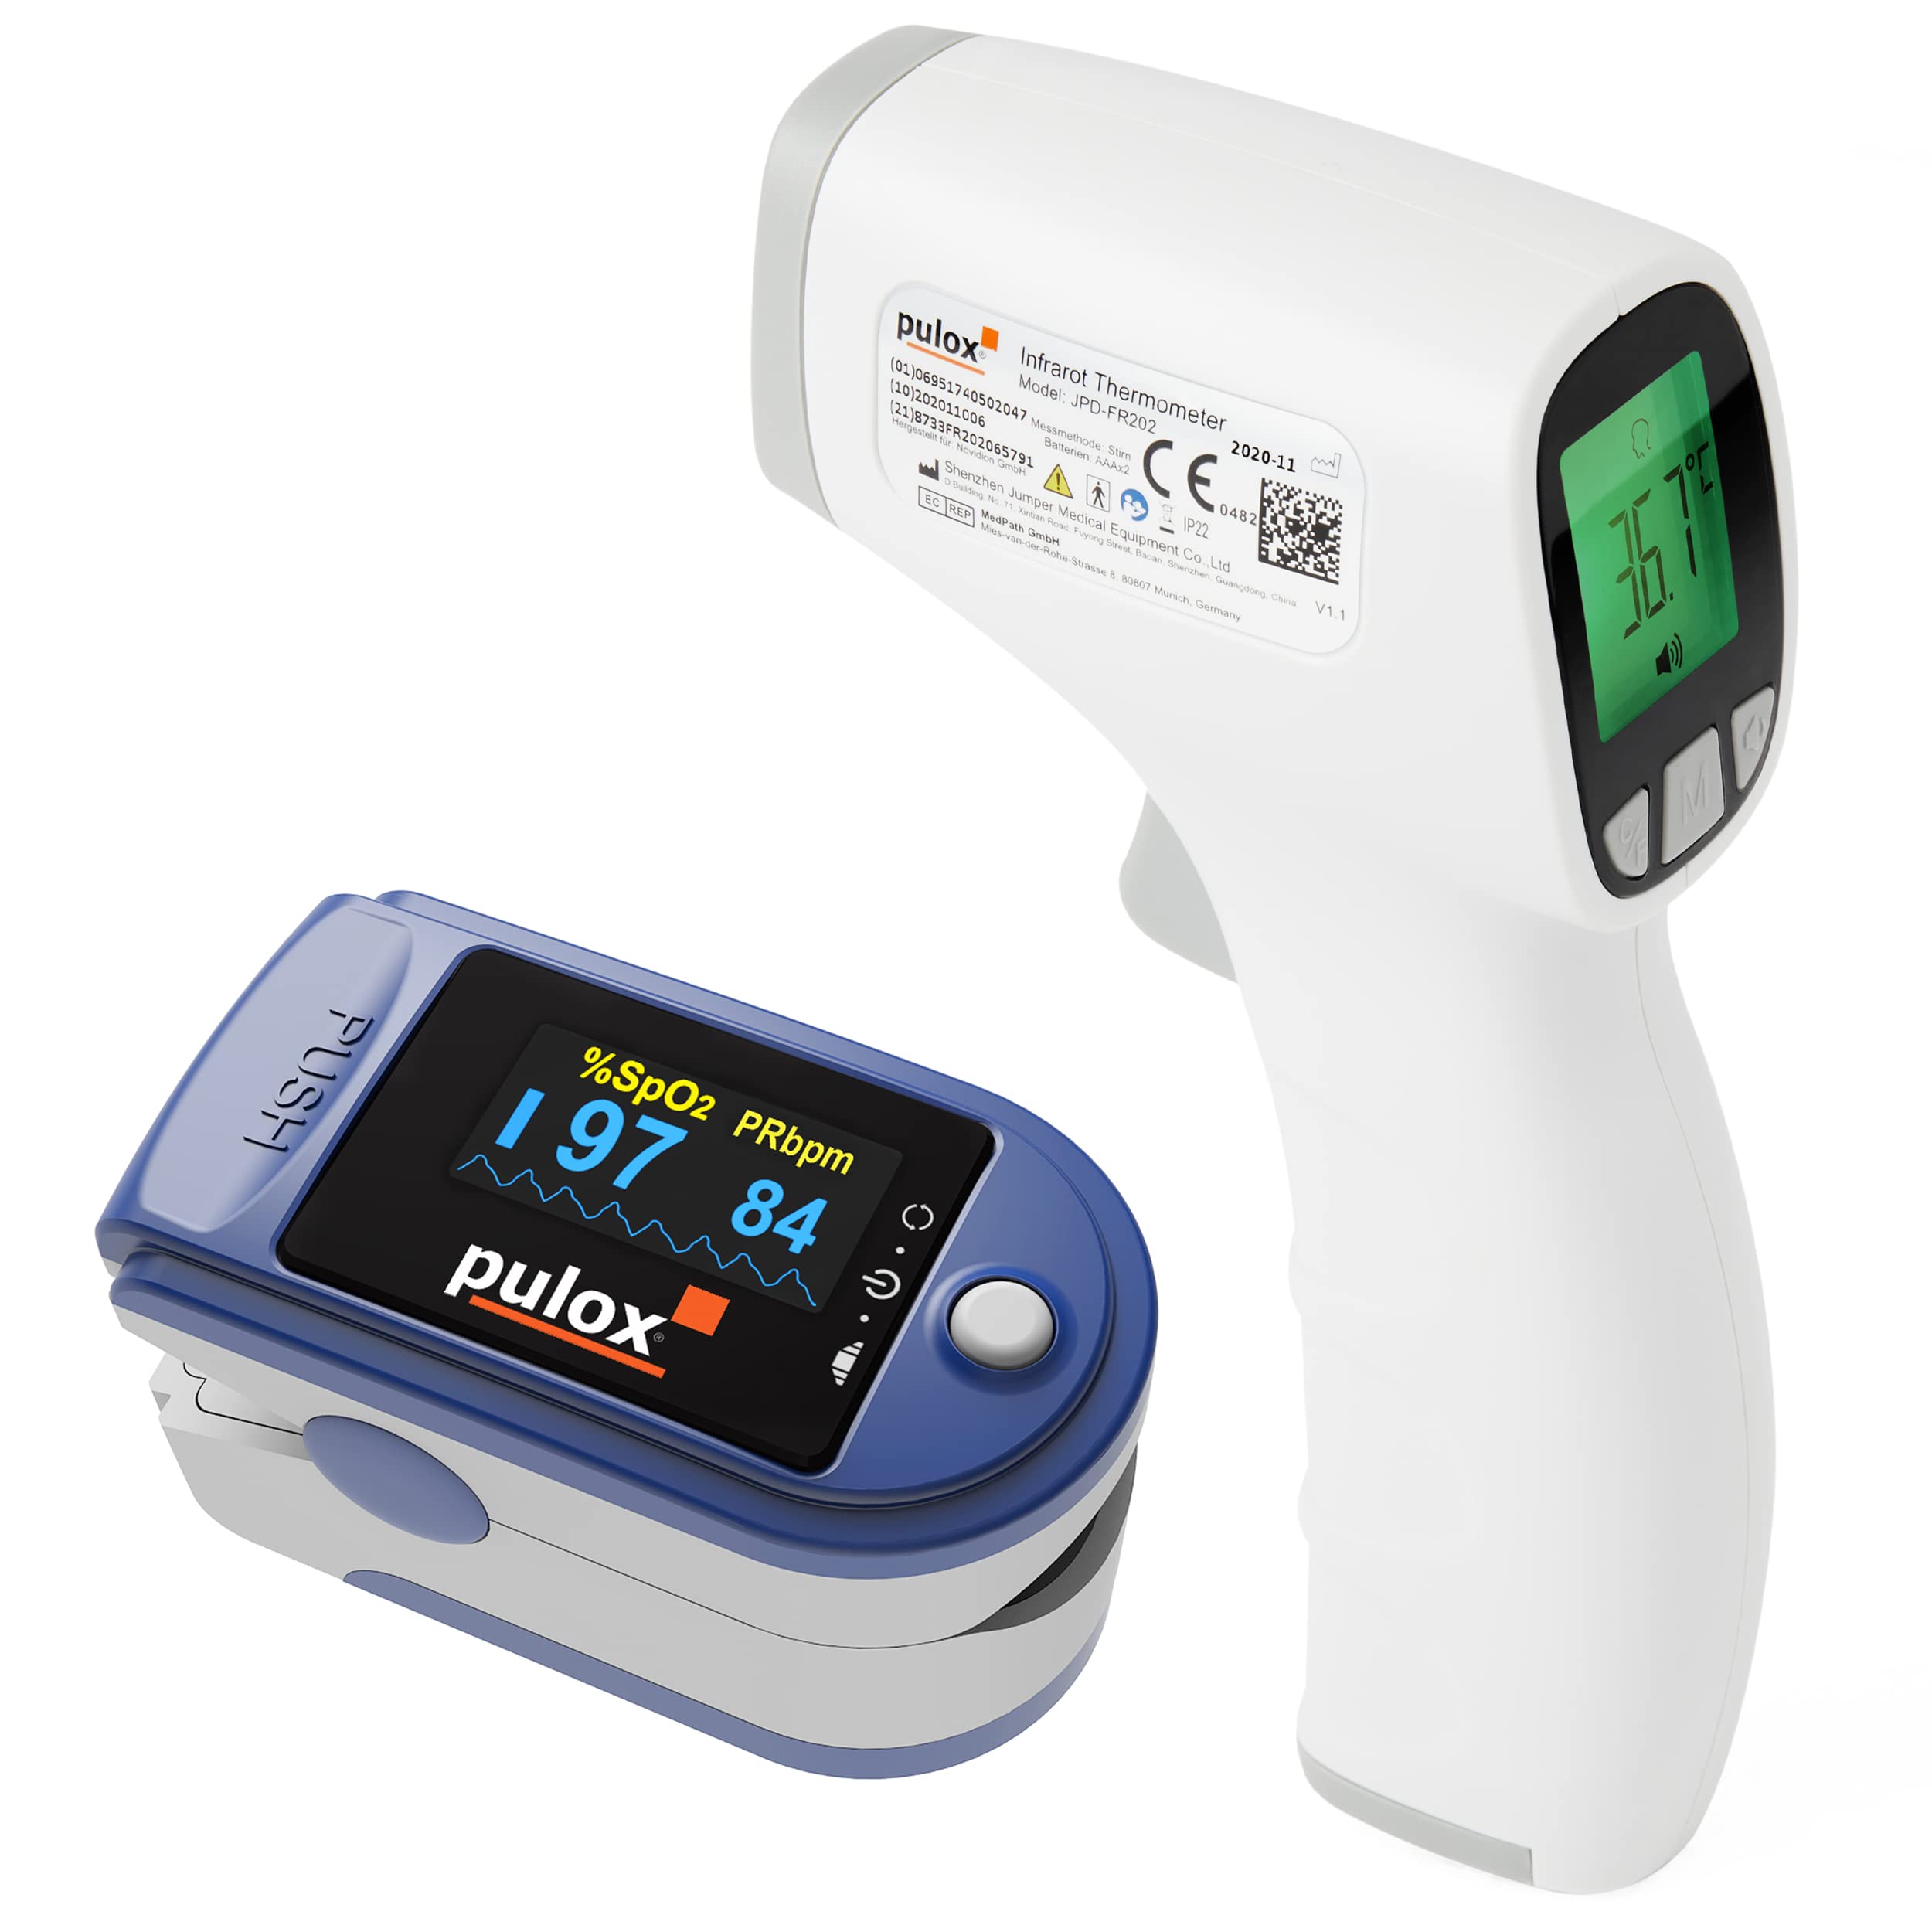 Pulsoximeter pulox PO-200 Solo Set mit Infrarot Thermometer JPD-FR202